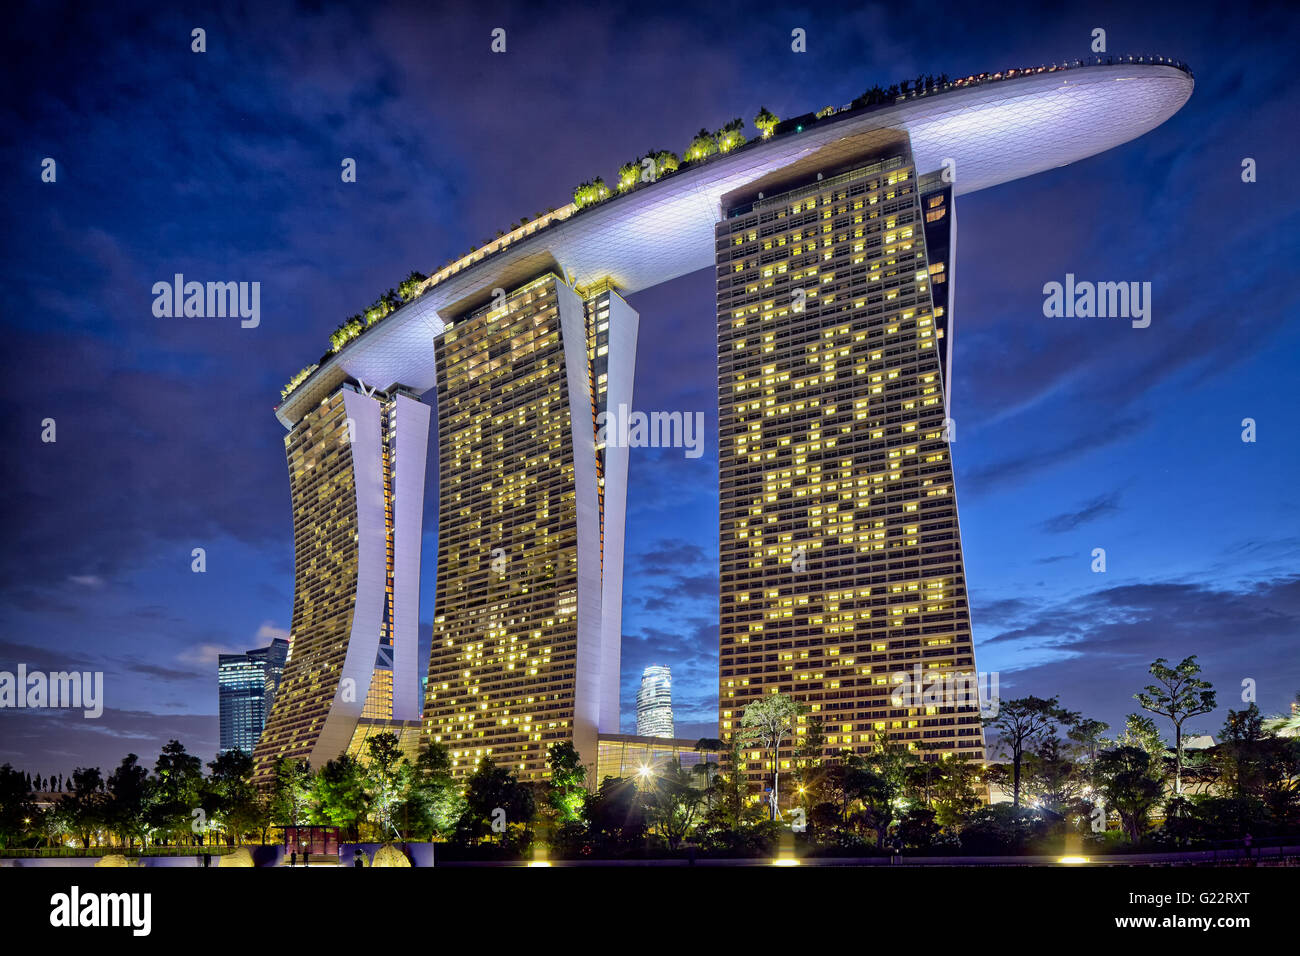 Exterior evening view of Marina Bay Sands from Gardens by the Bay, Marina Bay, Singapore on July 22, 2012. Stock Photo